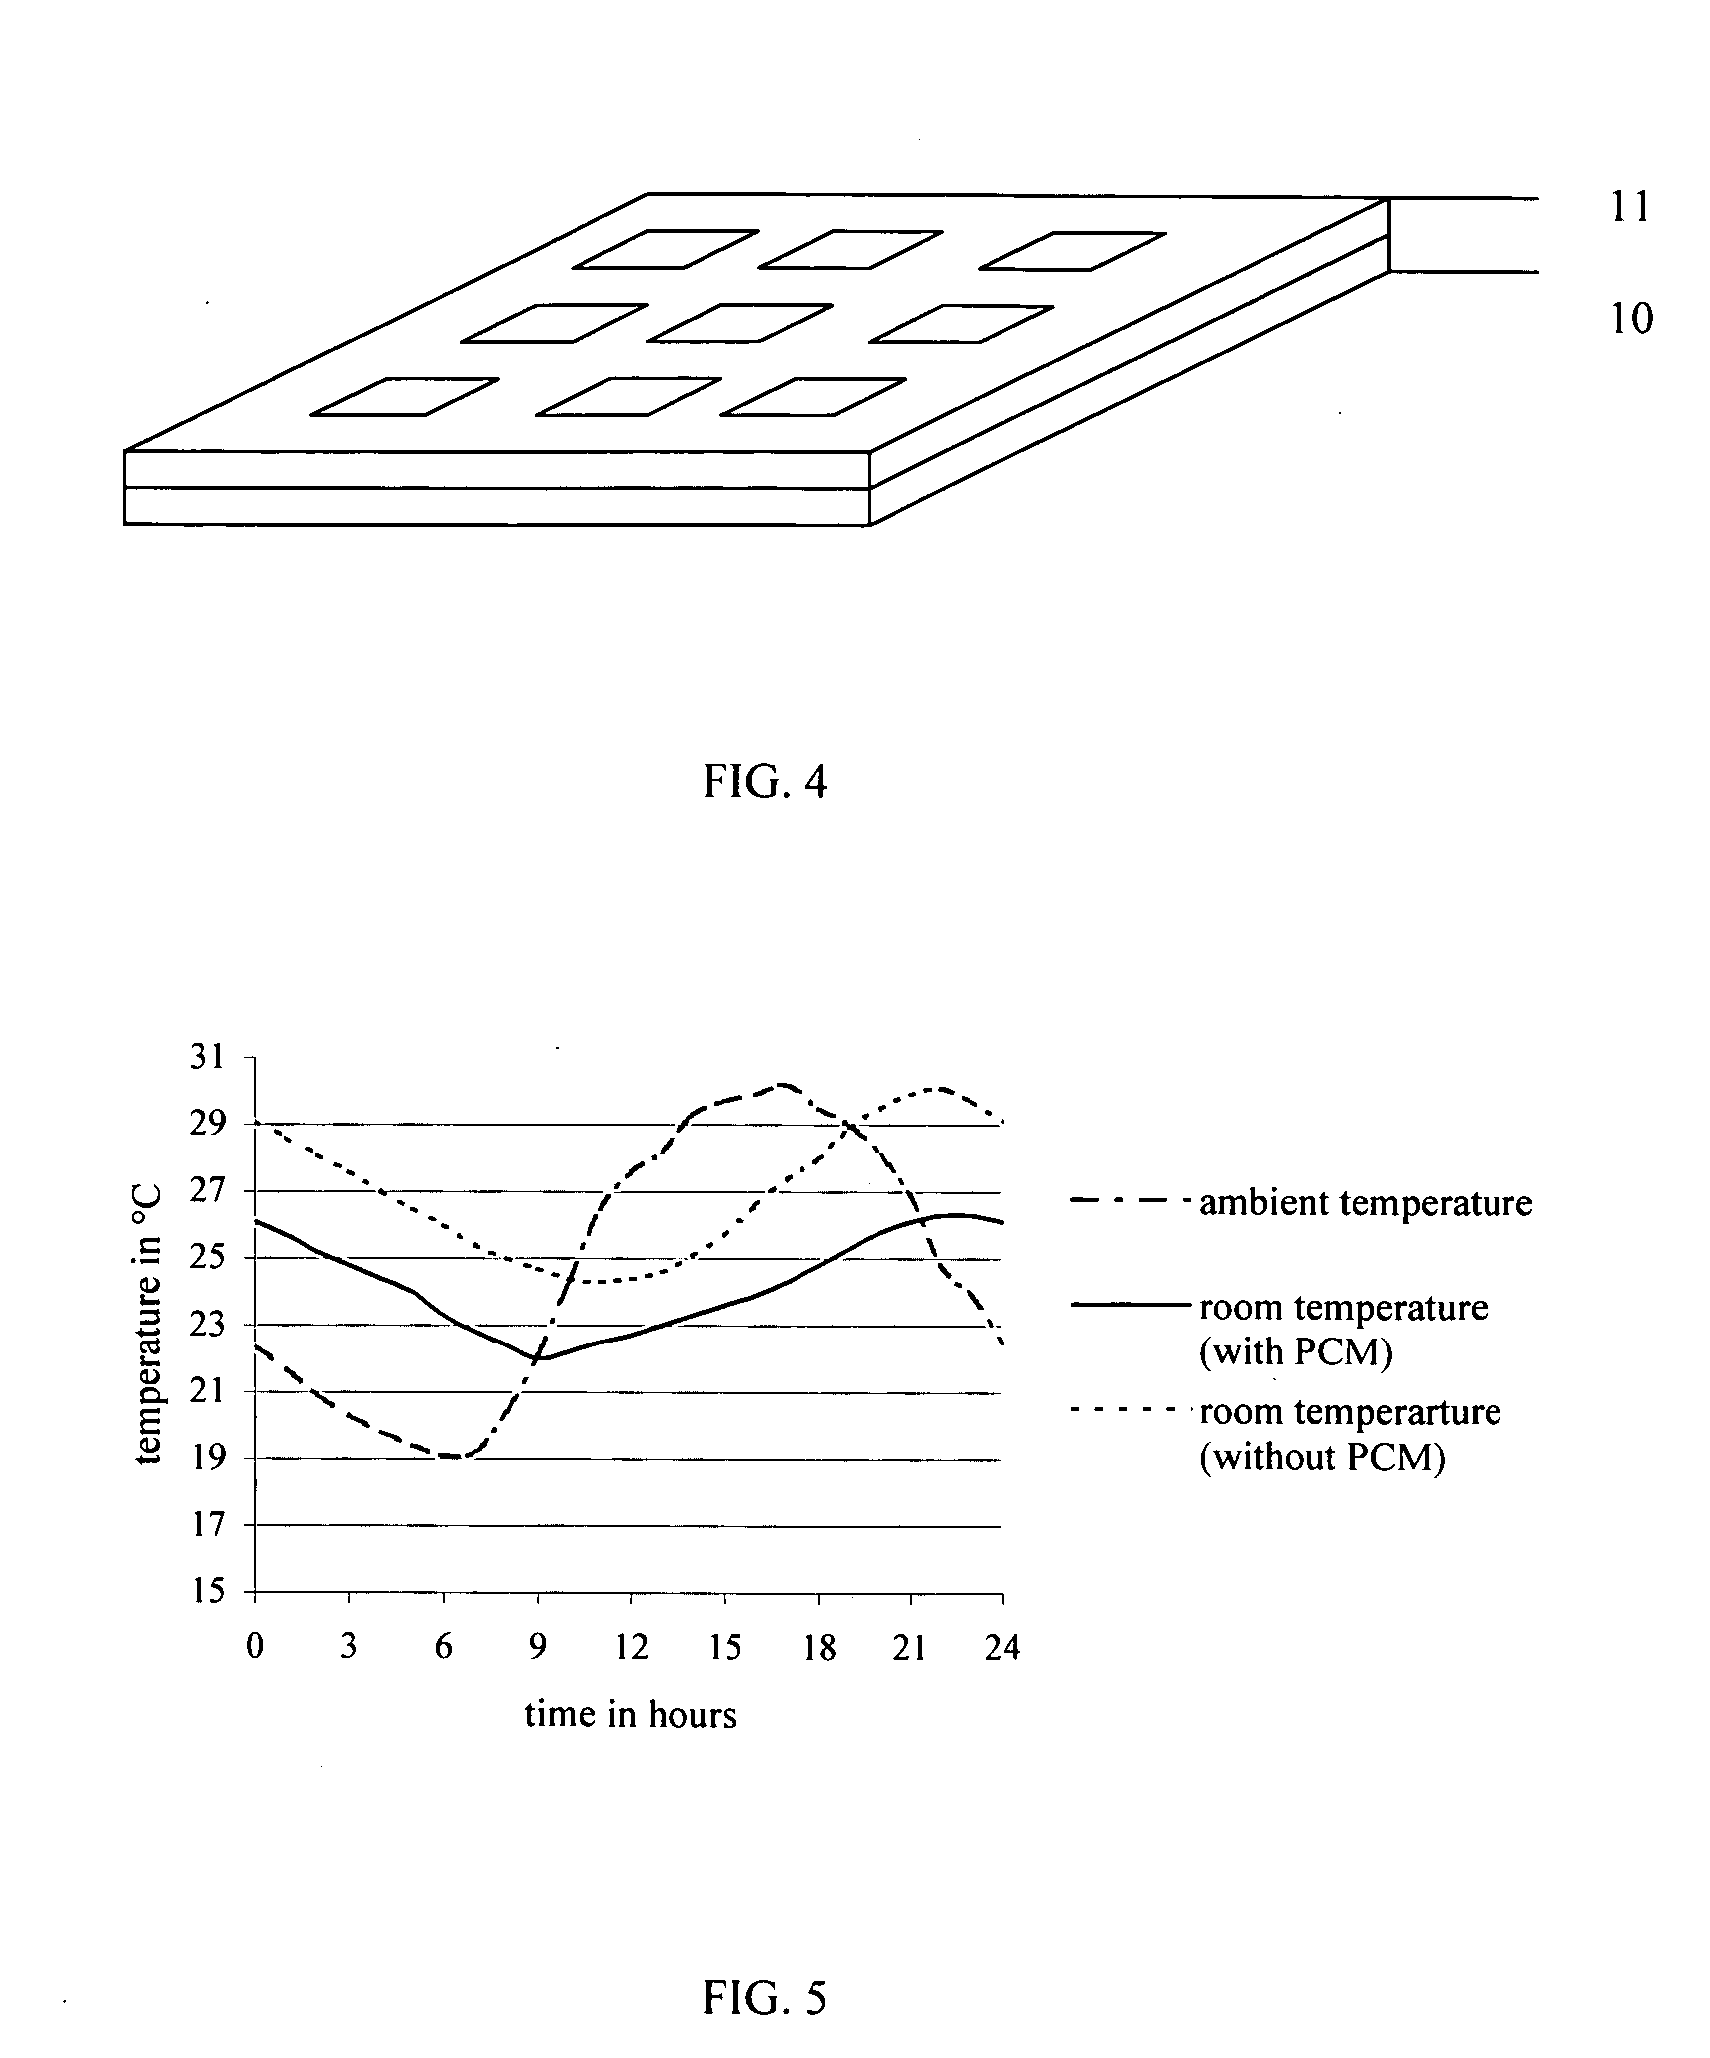 Building conditioning technique using phase change materials in the roof structure